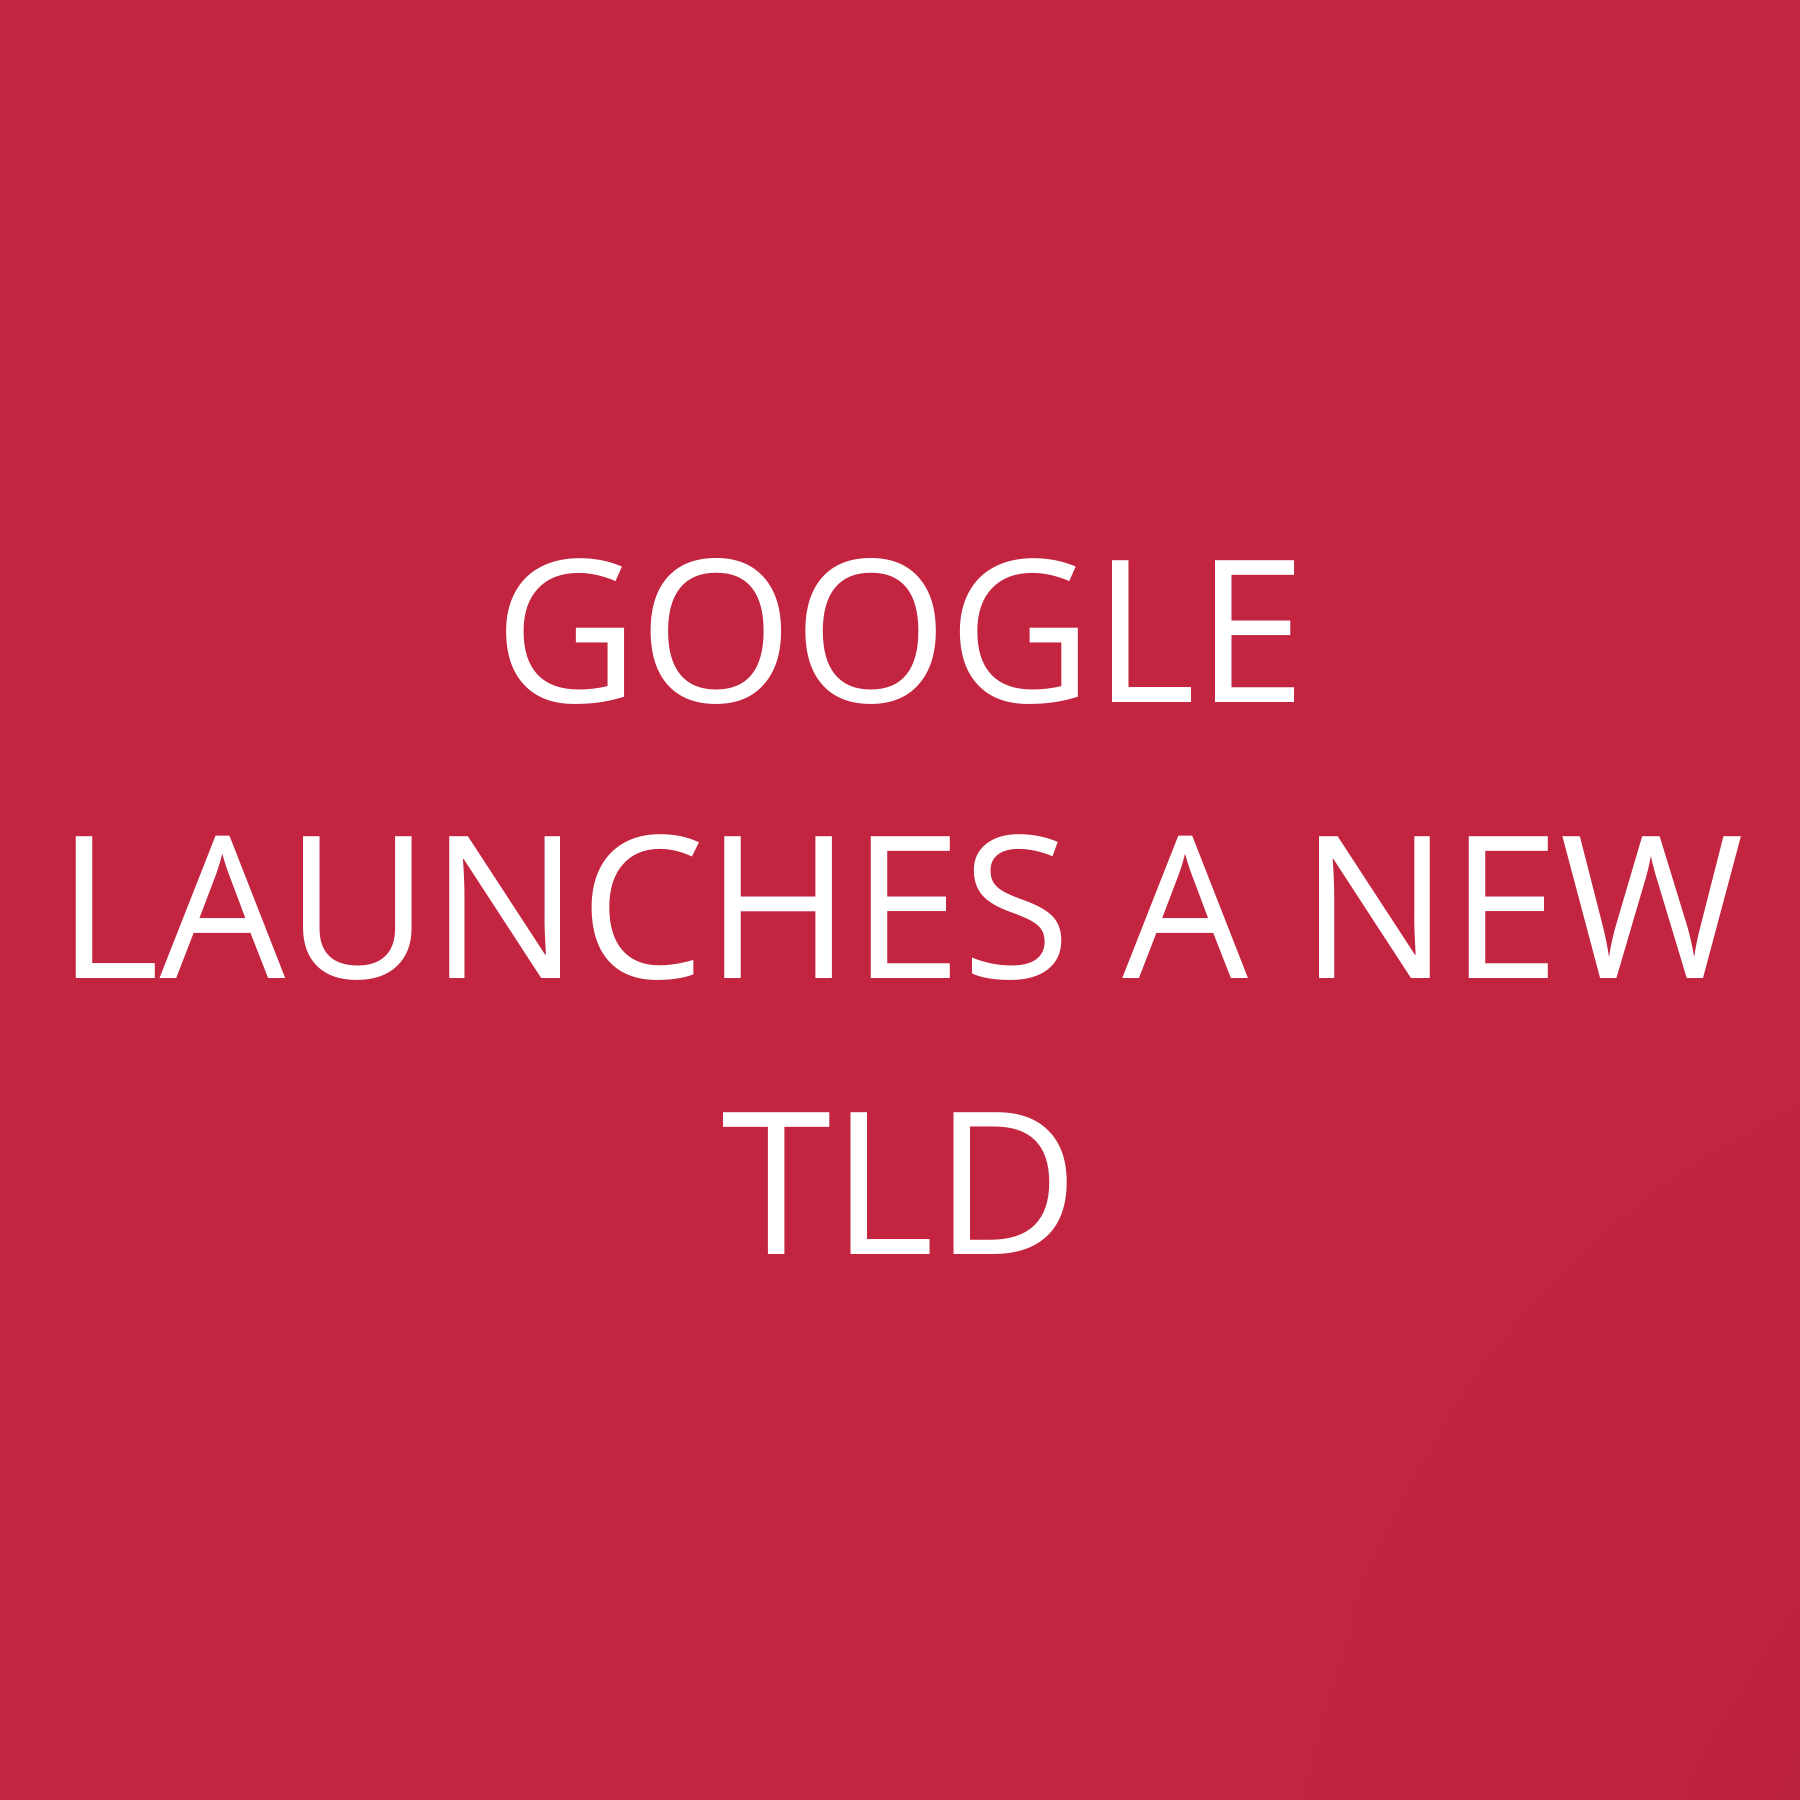 Google launches a new TLD